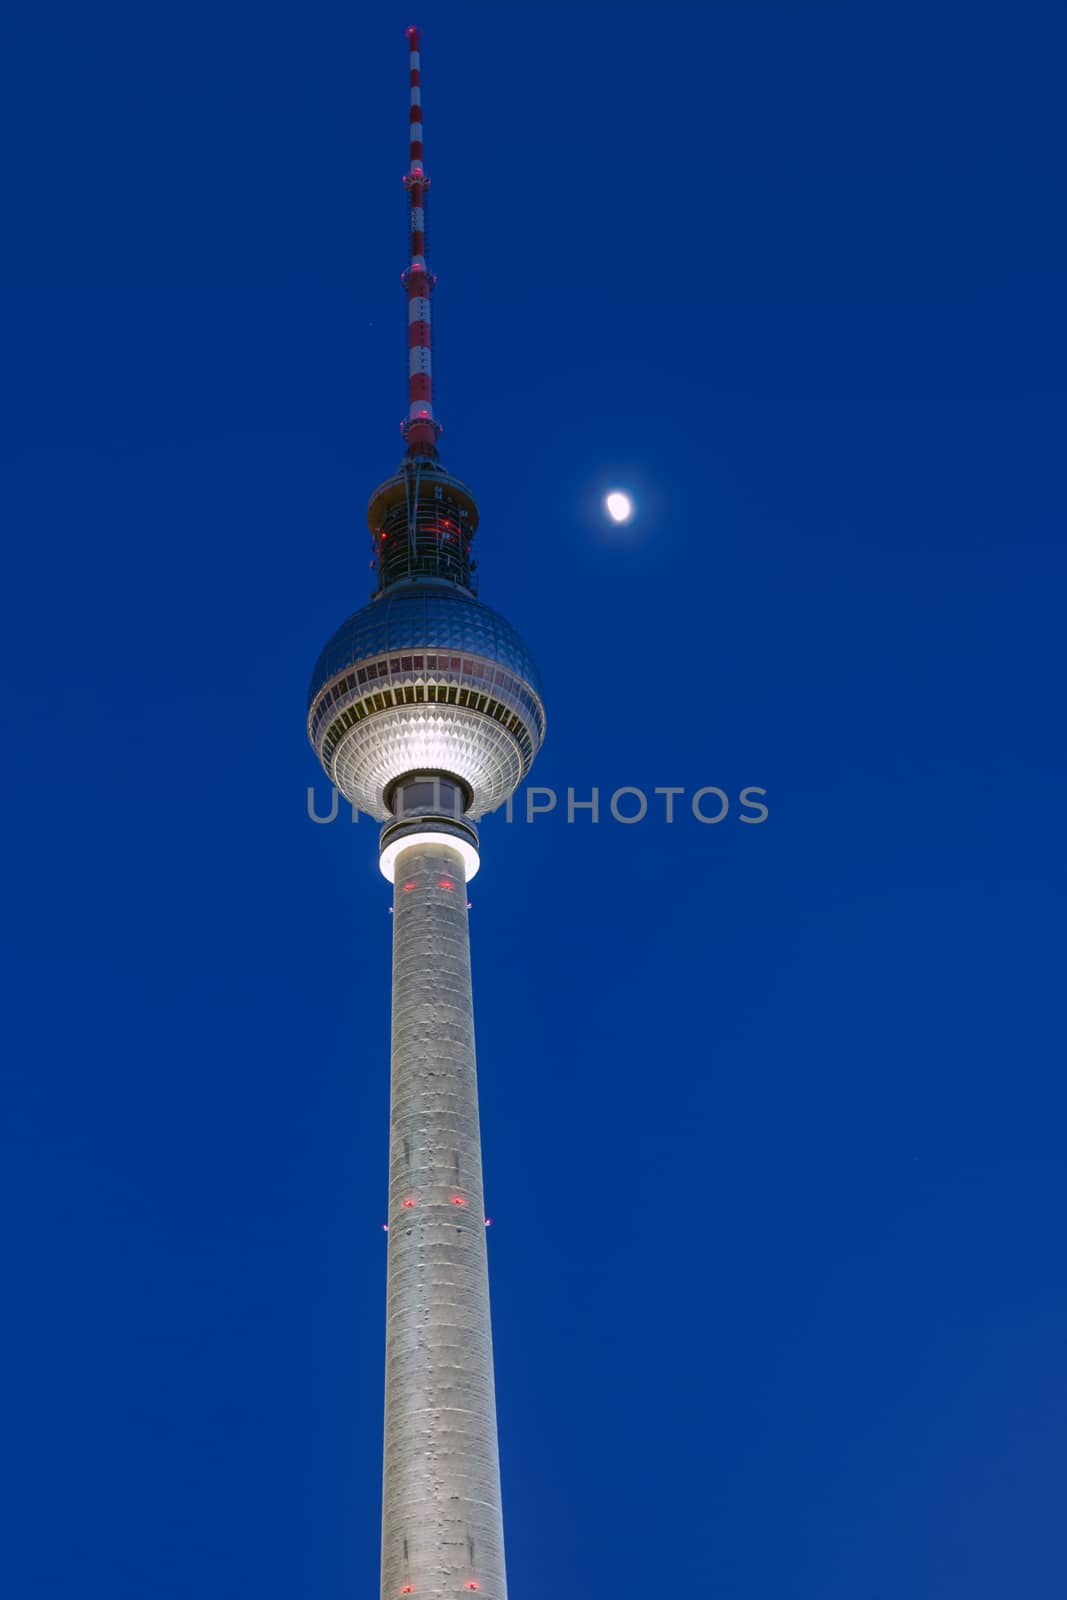 The television tower in Berlin at night by elxeneize